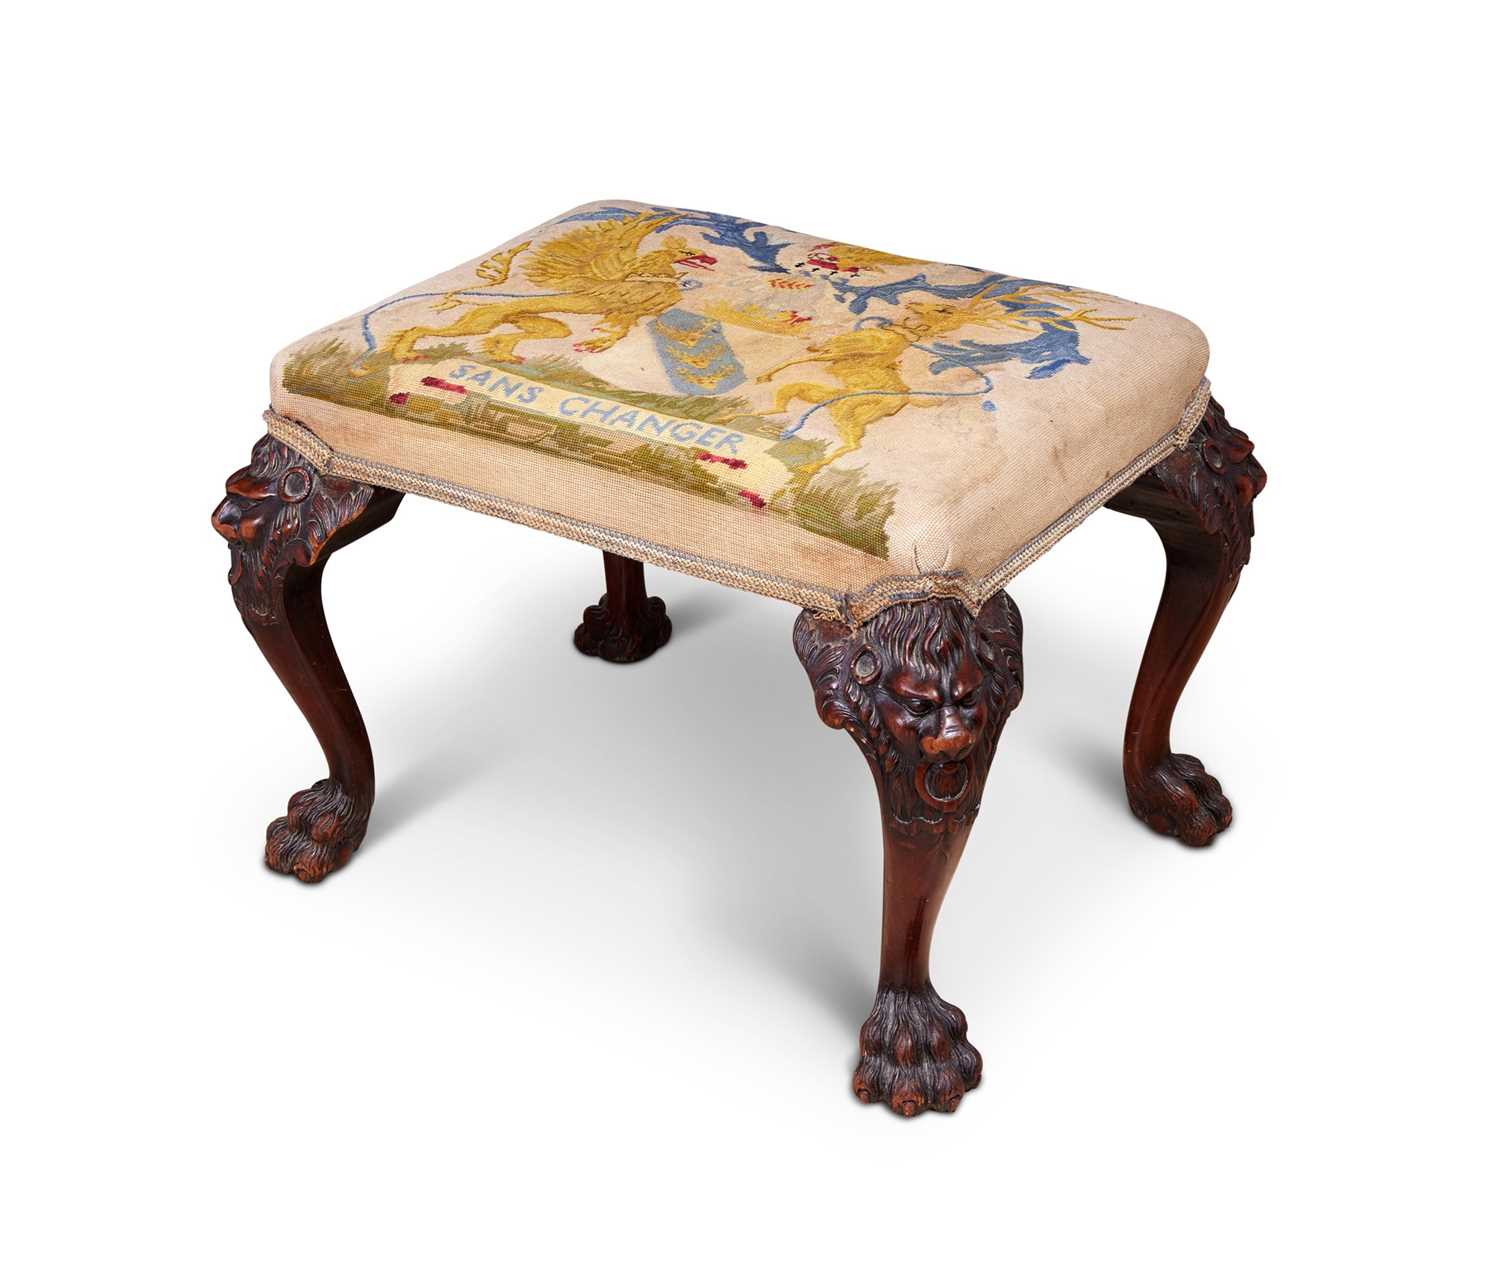 A 19TH CENTURY IRISH MAHOGANY FOOTSTOOL WITH THE ARMS OF THE EARLY OF DERBY